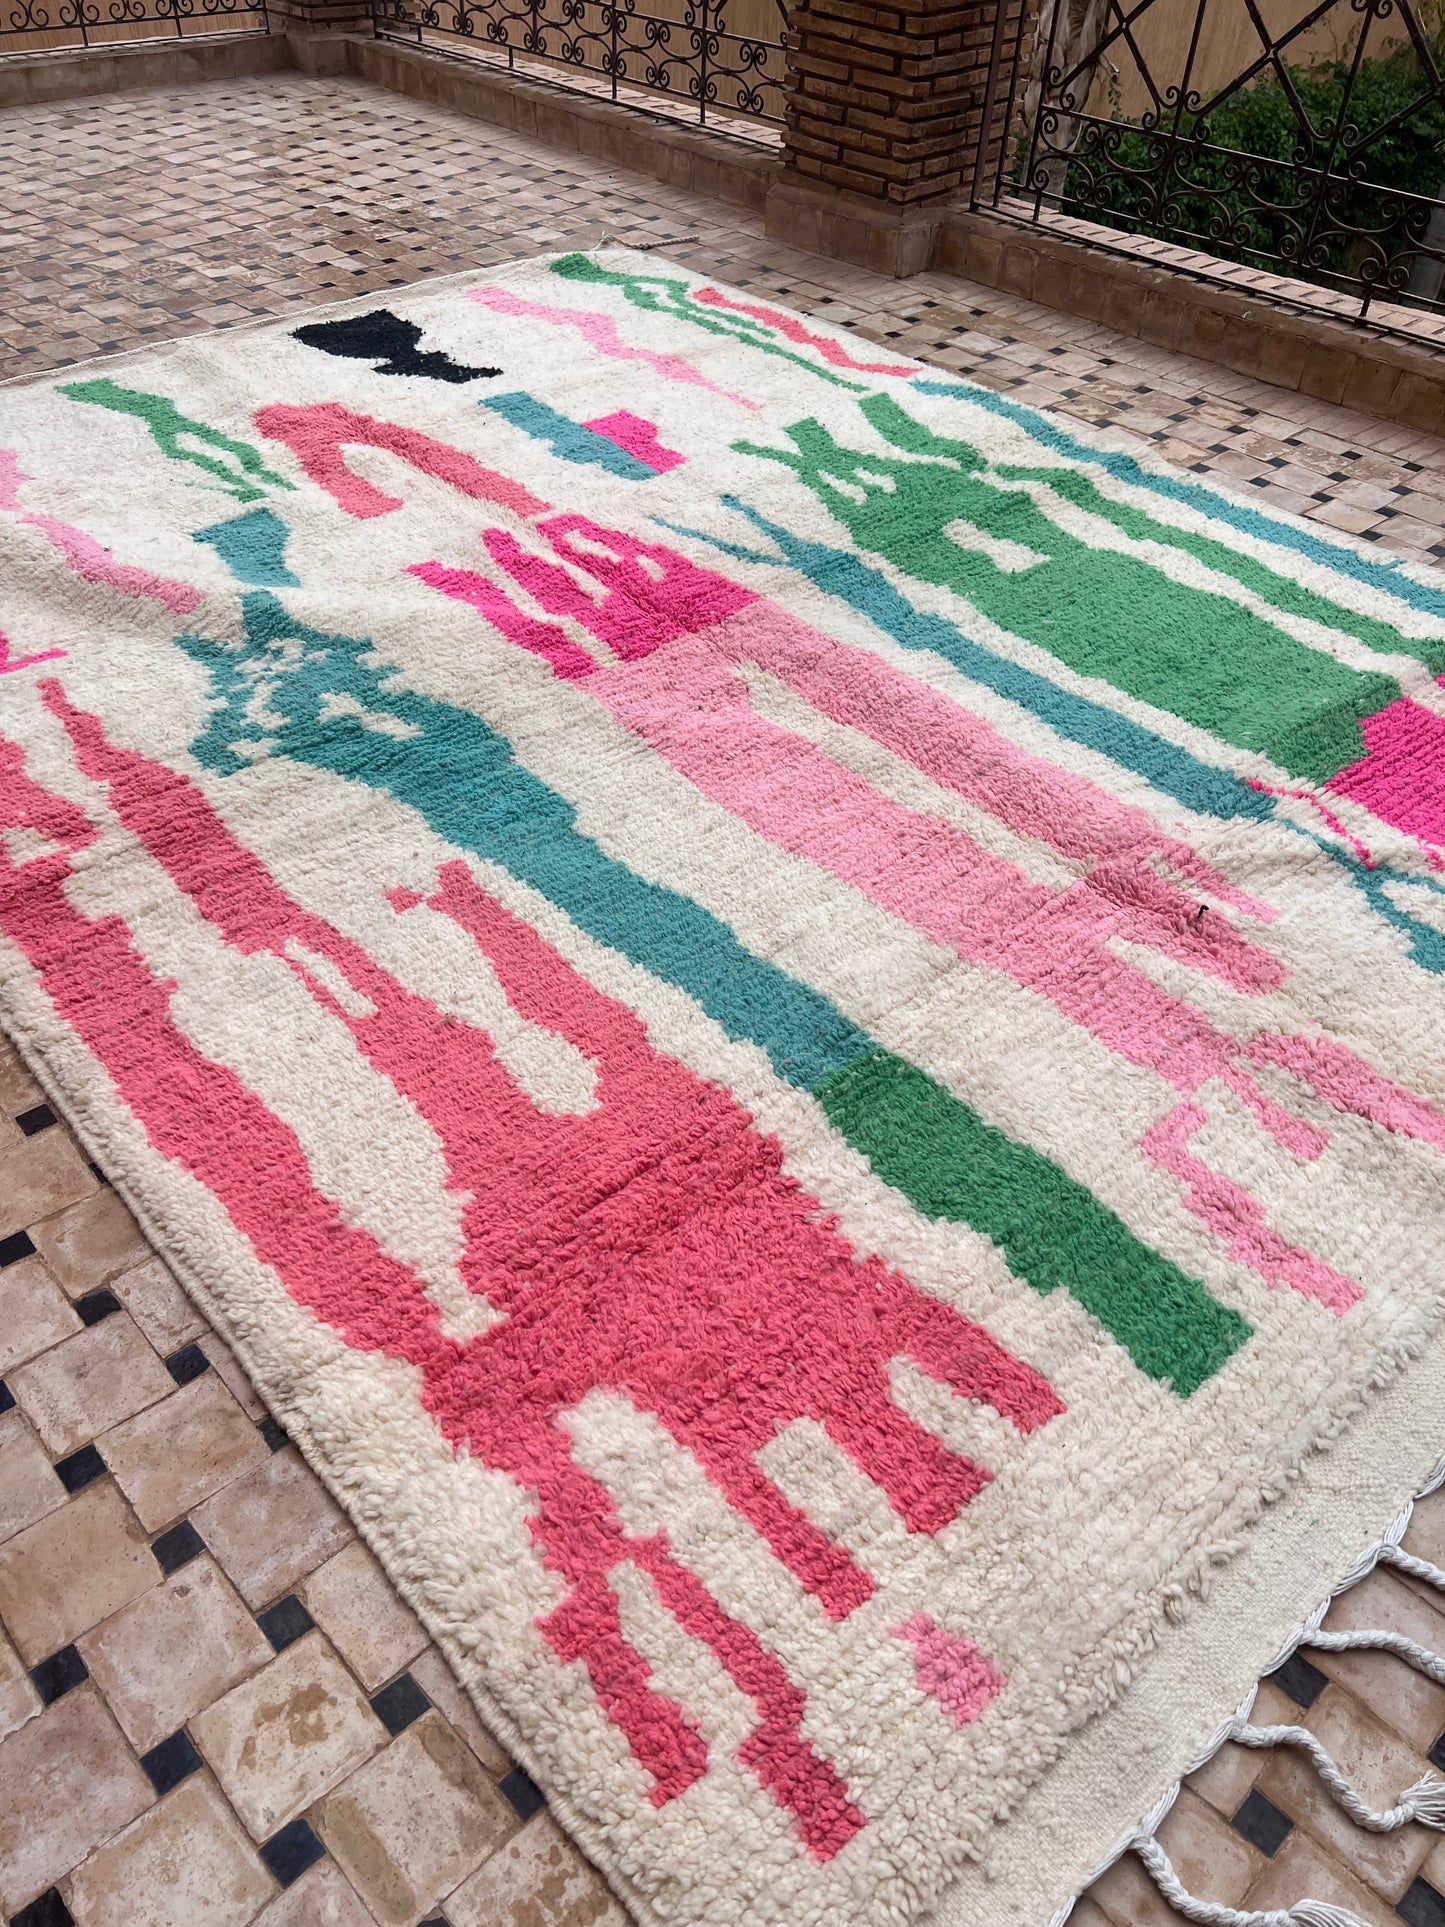 Canvas of Whimsy – Handwoven Wool Moroccan Rug, 300x200 cm